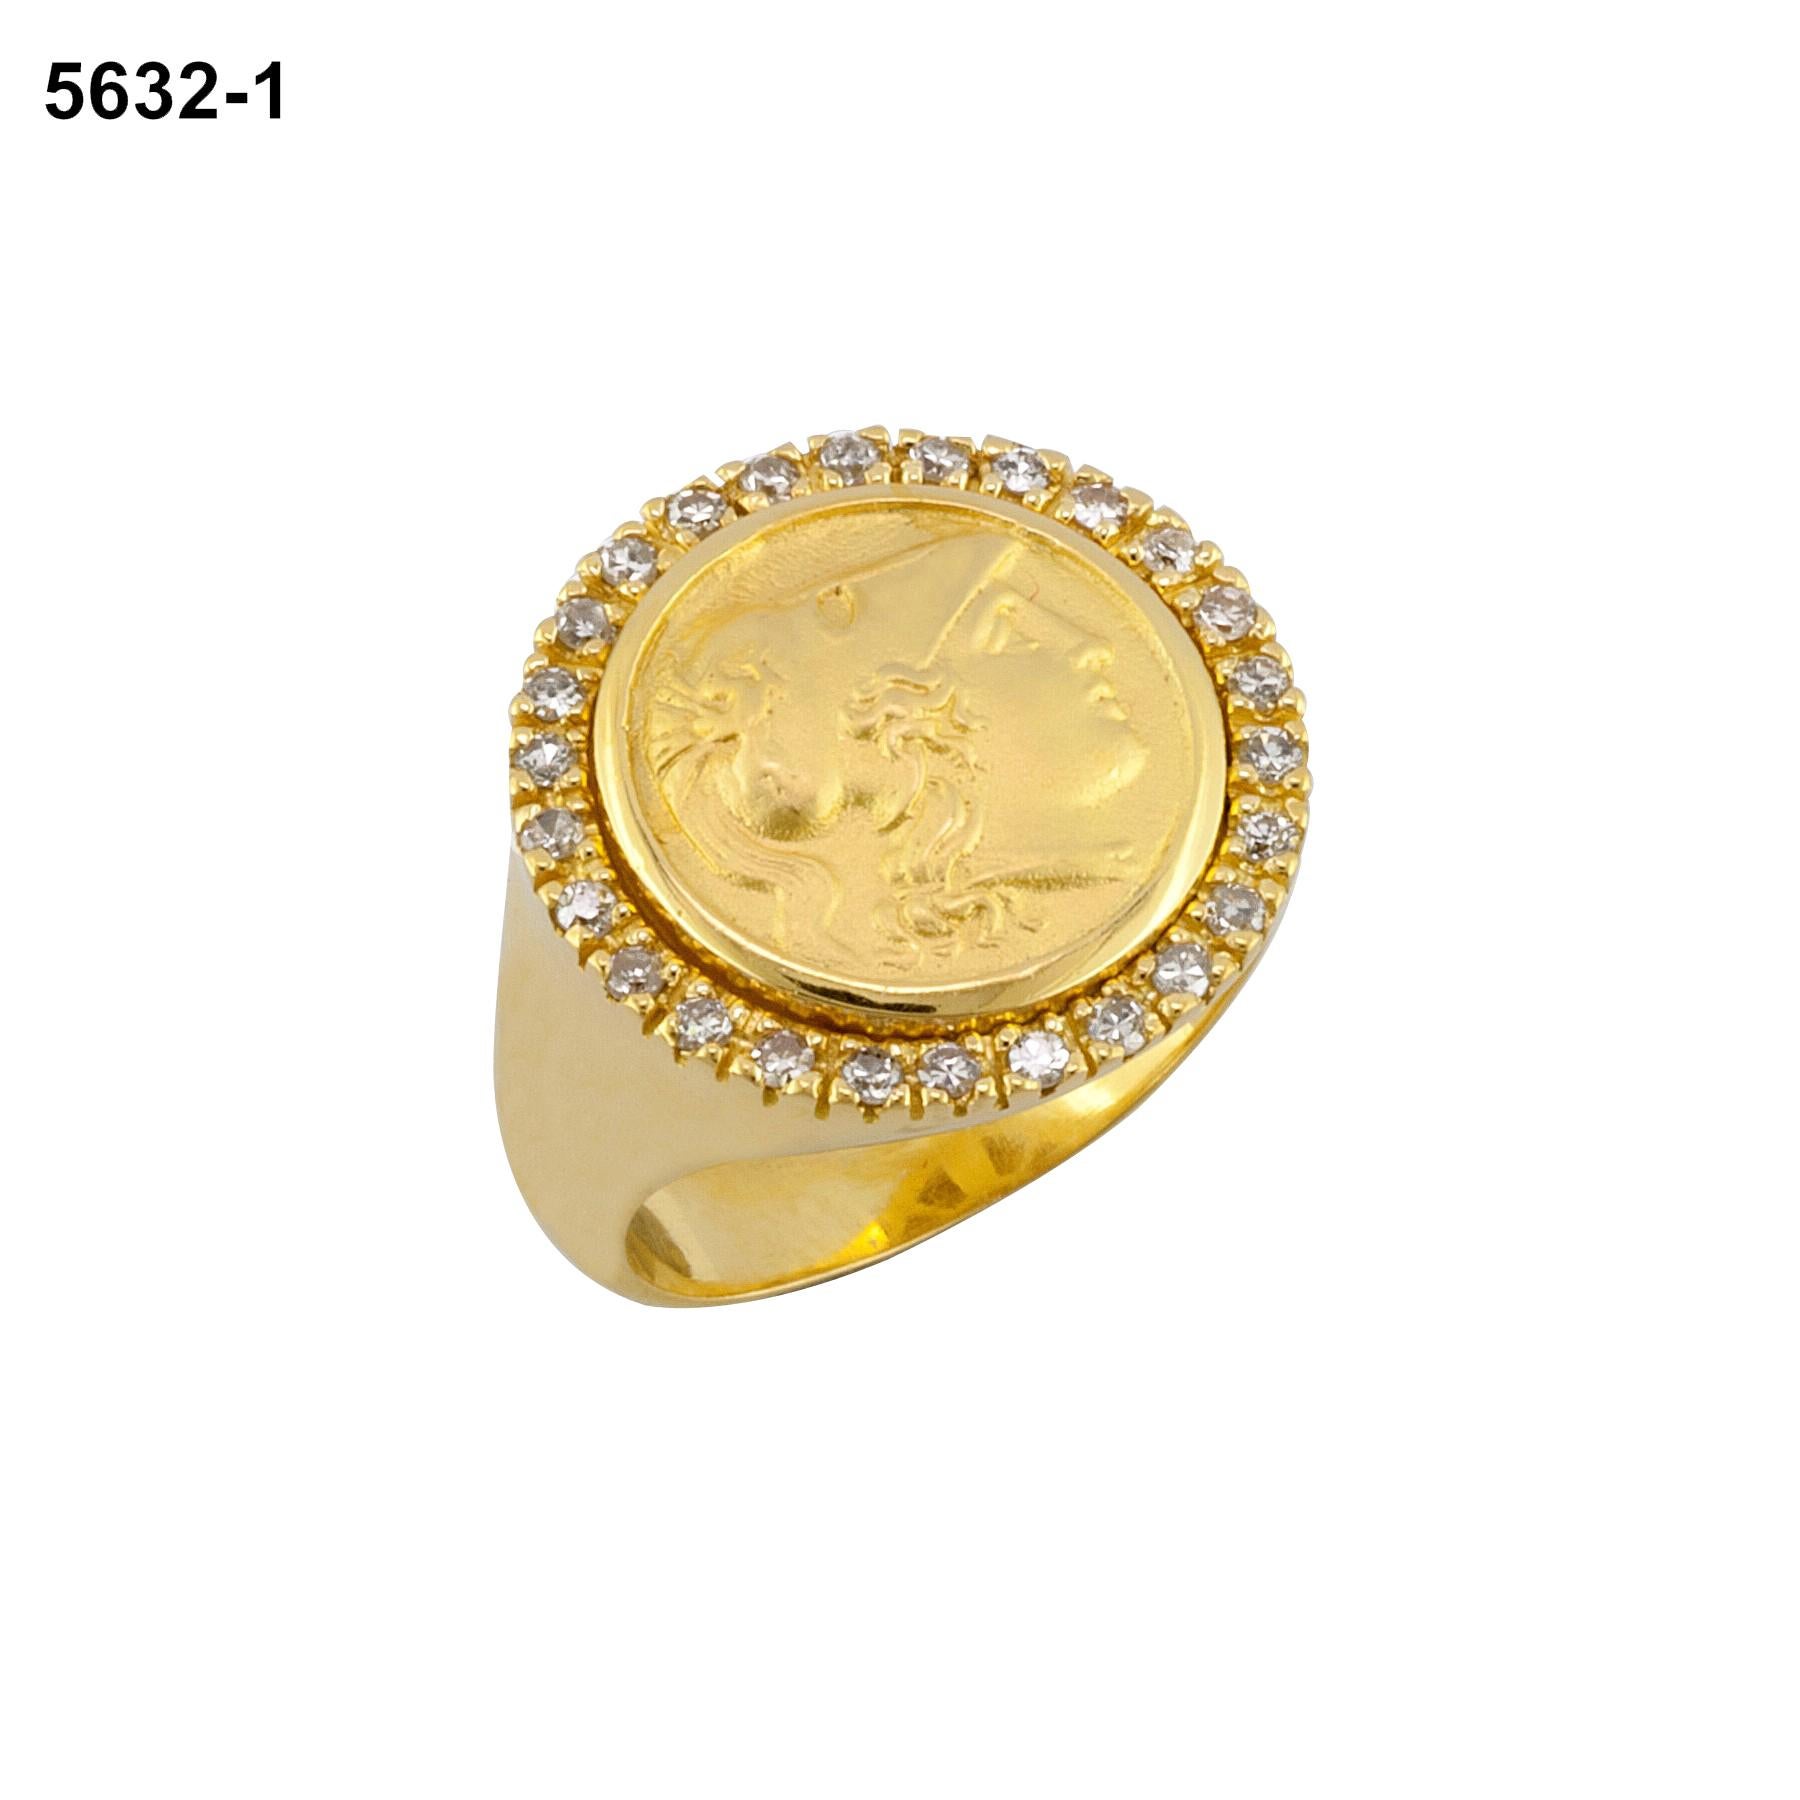 S.Georgios designer 18 Karat Yellow Gold Unisex Diamond Bezel Coin Ring all custom made by hand. This stunning coin ring has a solid 18 Karat Gold Coin of Athina, (the coin is an exact copy of the original) the Goddess of wisdom - a symbol of